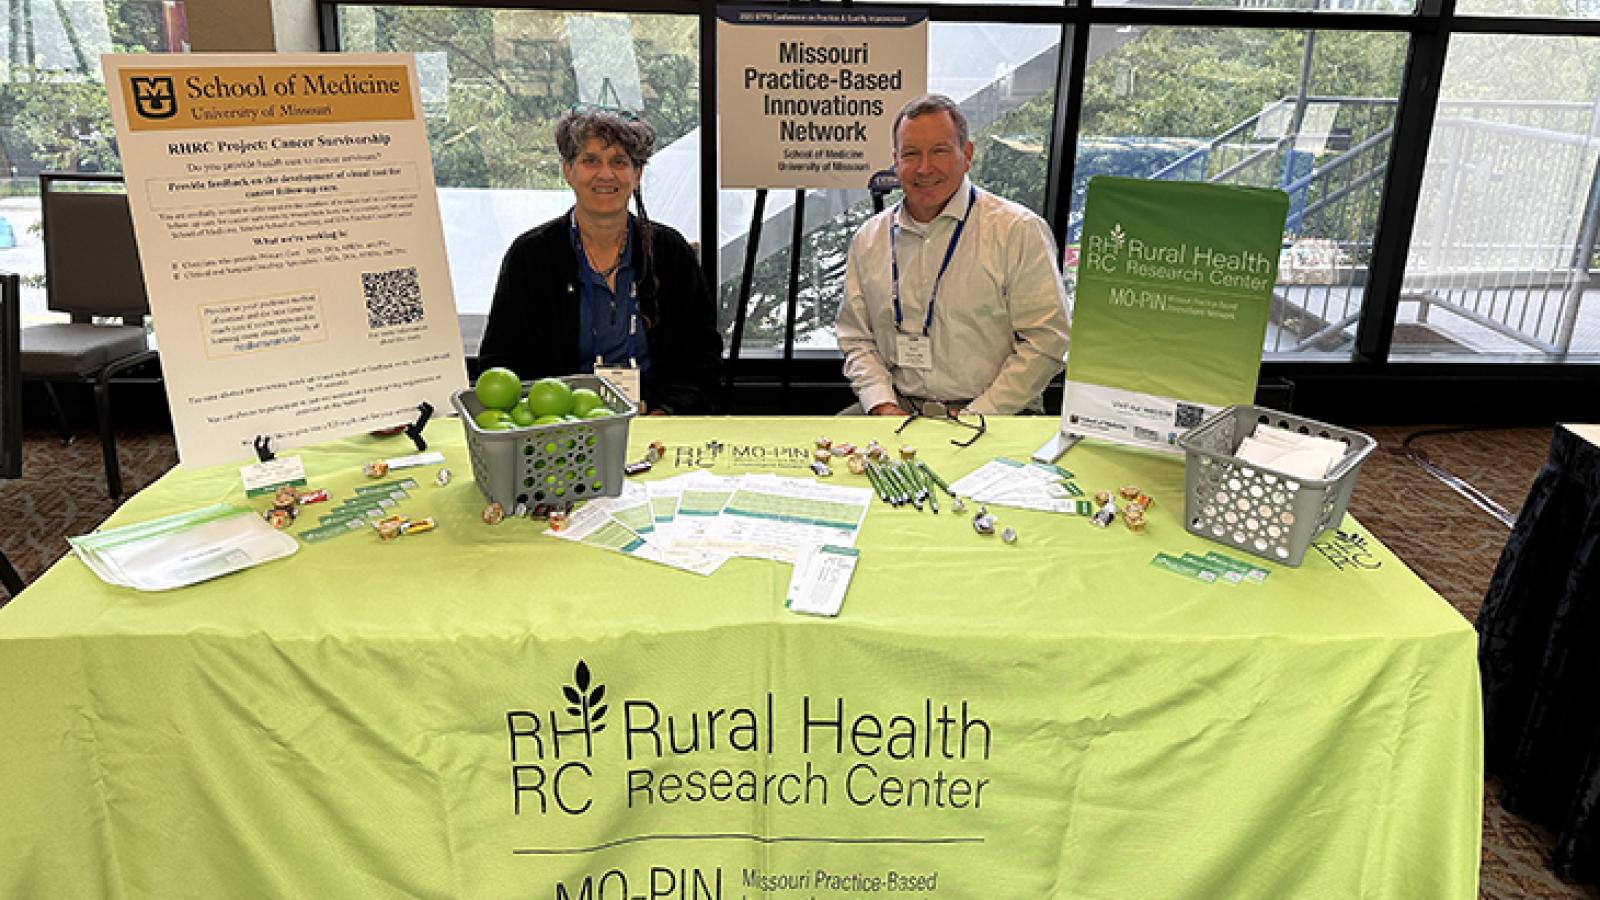 Jane McElroy and Kevin Everett RHRC booth